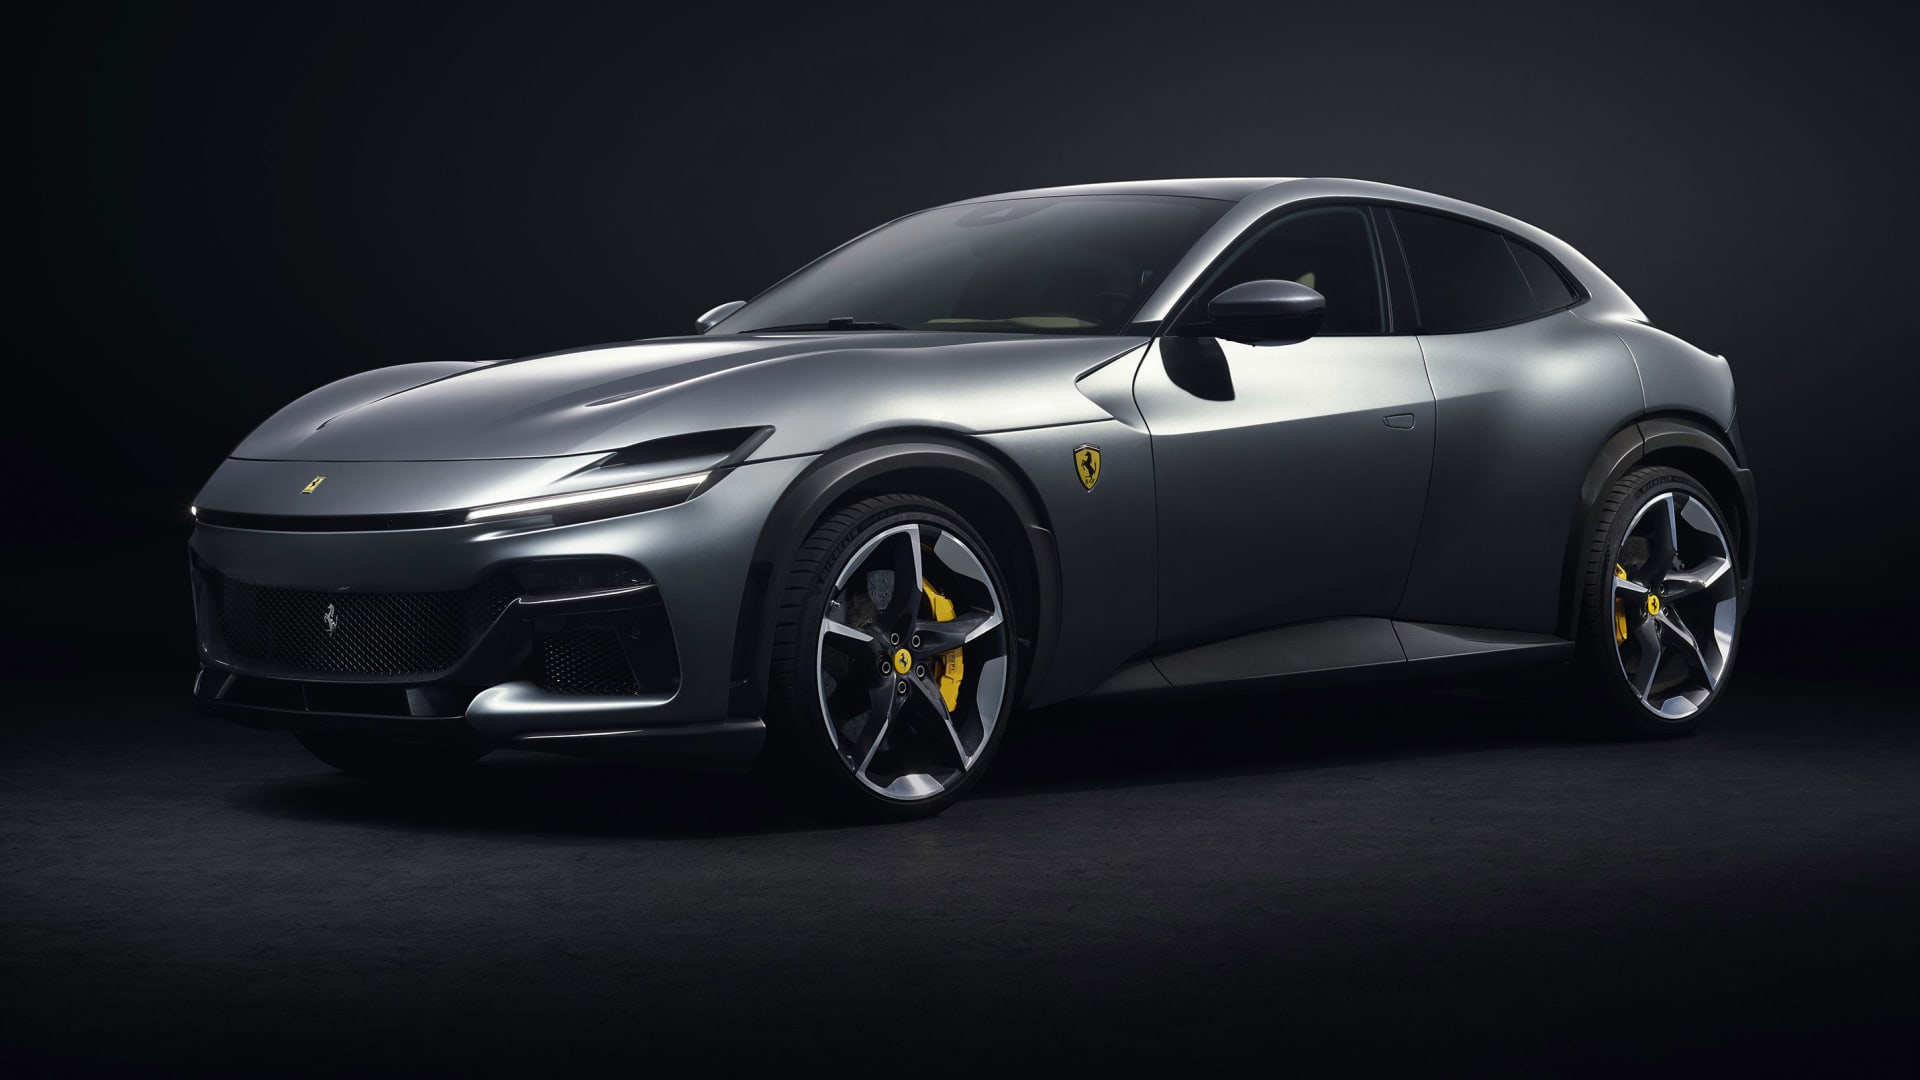 Ferrari just revealed its first-ever 4-door model, a high-riding and powerful sports car called the Purosangue Auto Recent